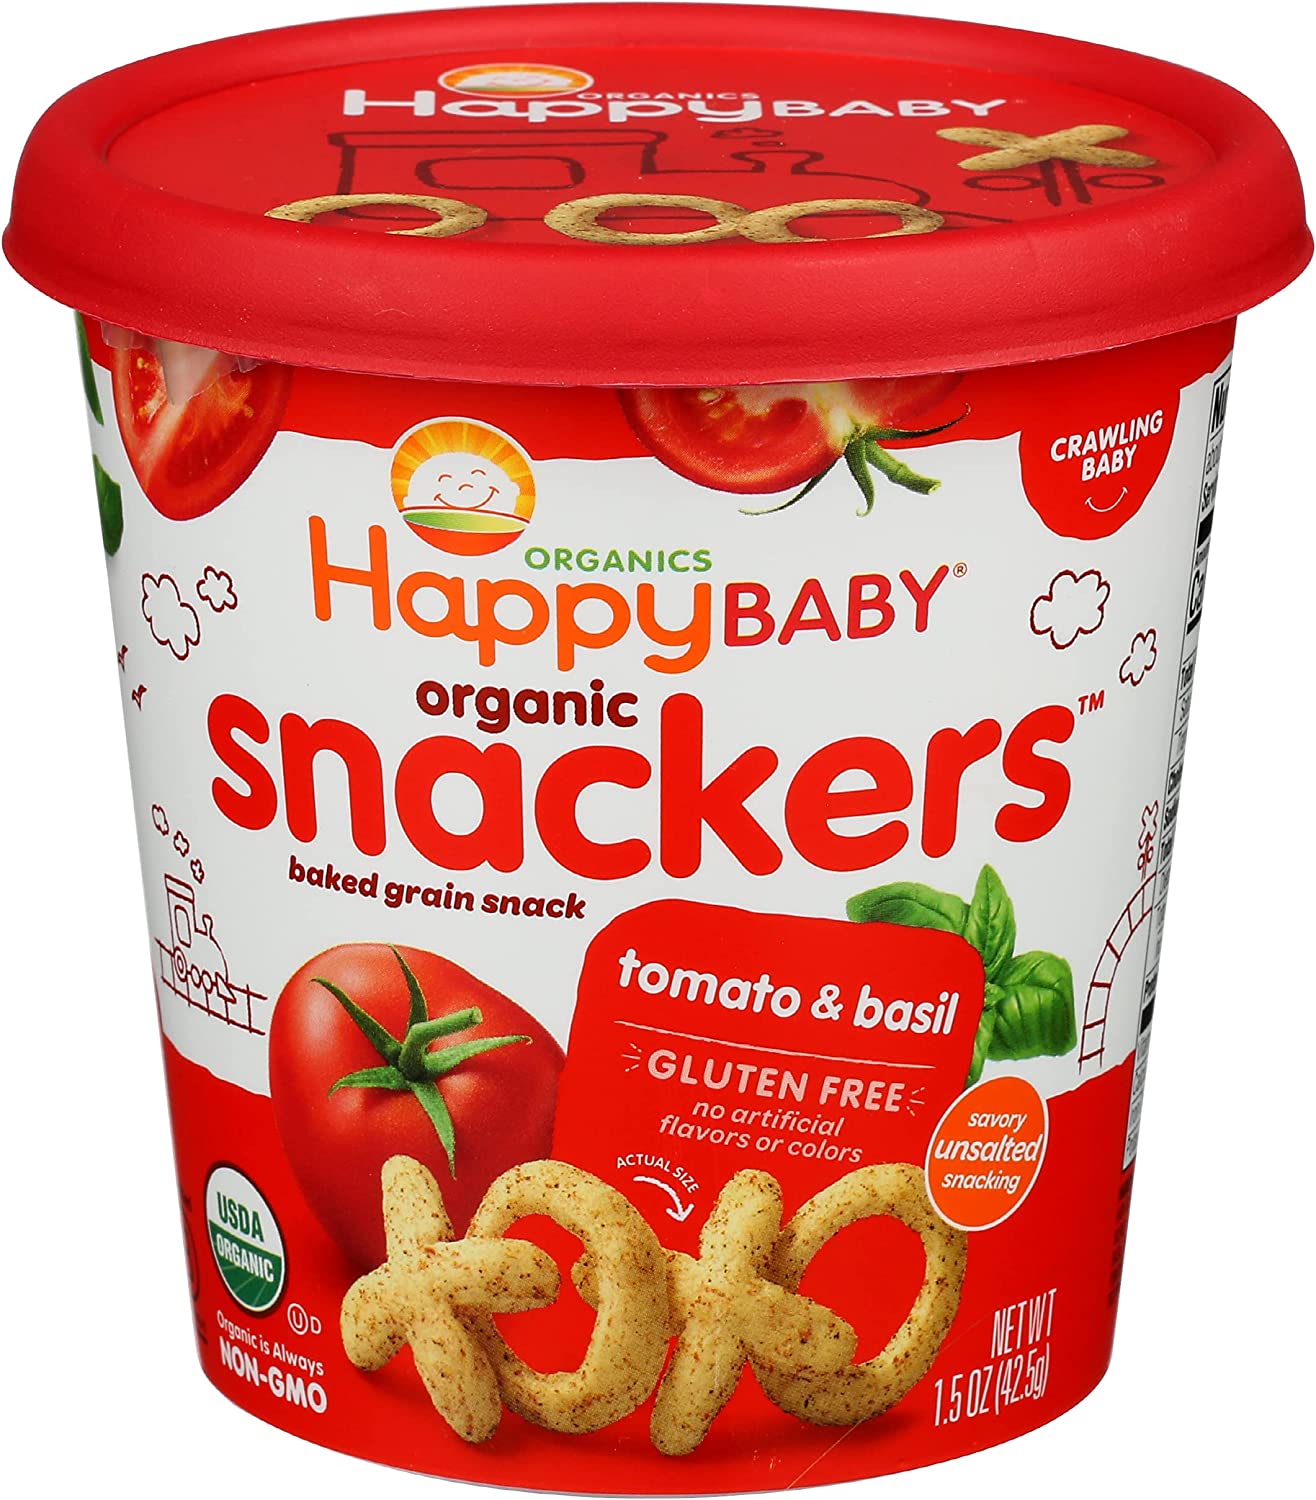 HAPPY BABY Organic Baked Tomato & Basil Snacker Cup, 1.5 OZ